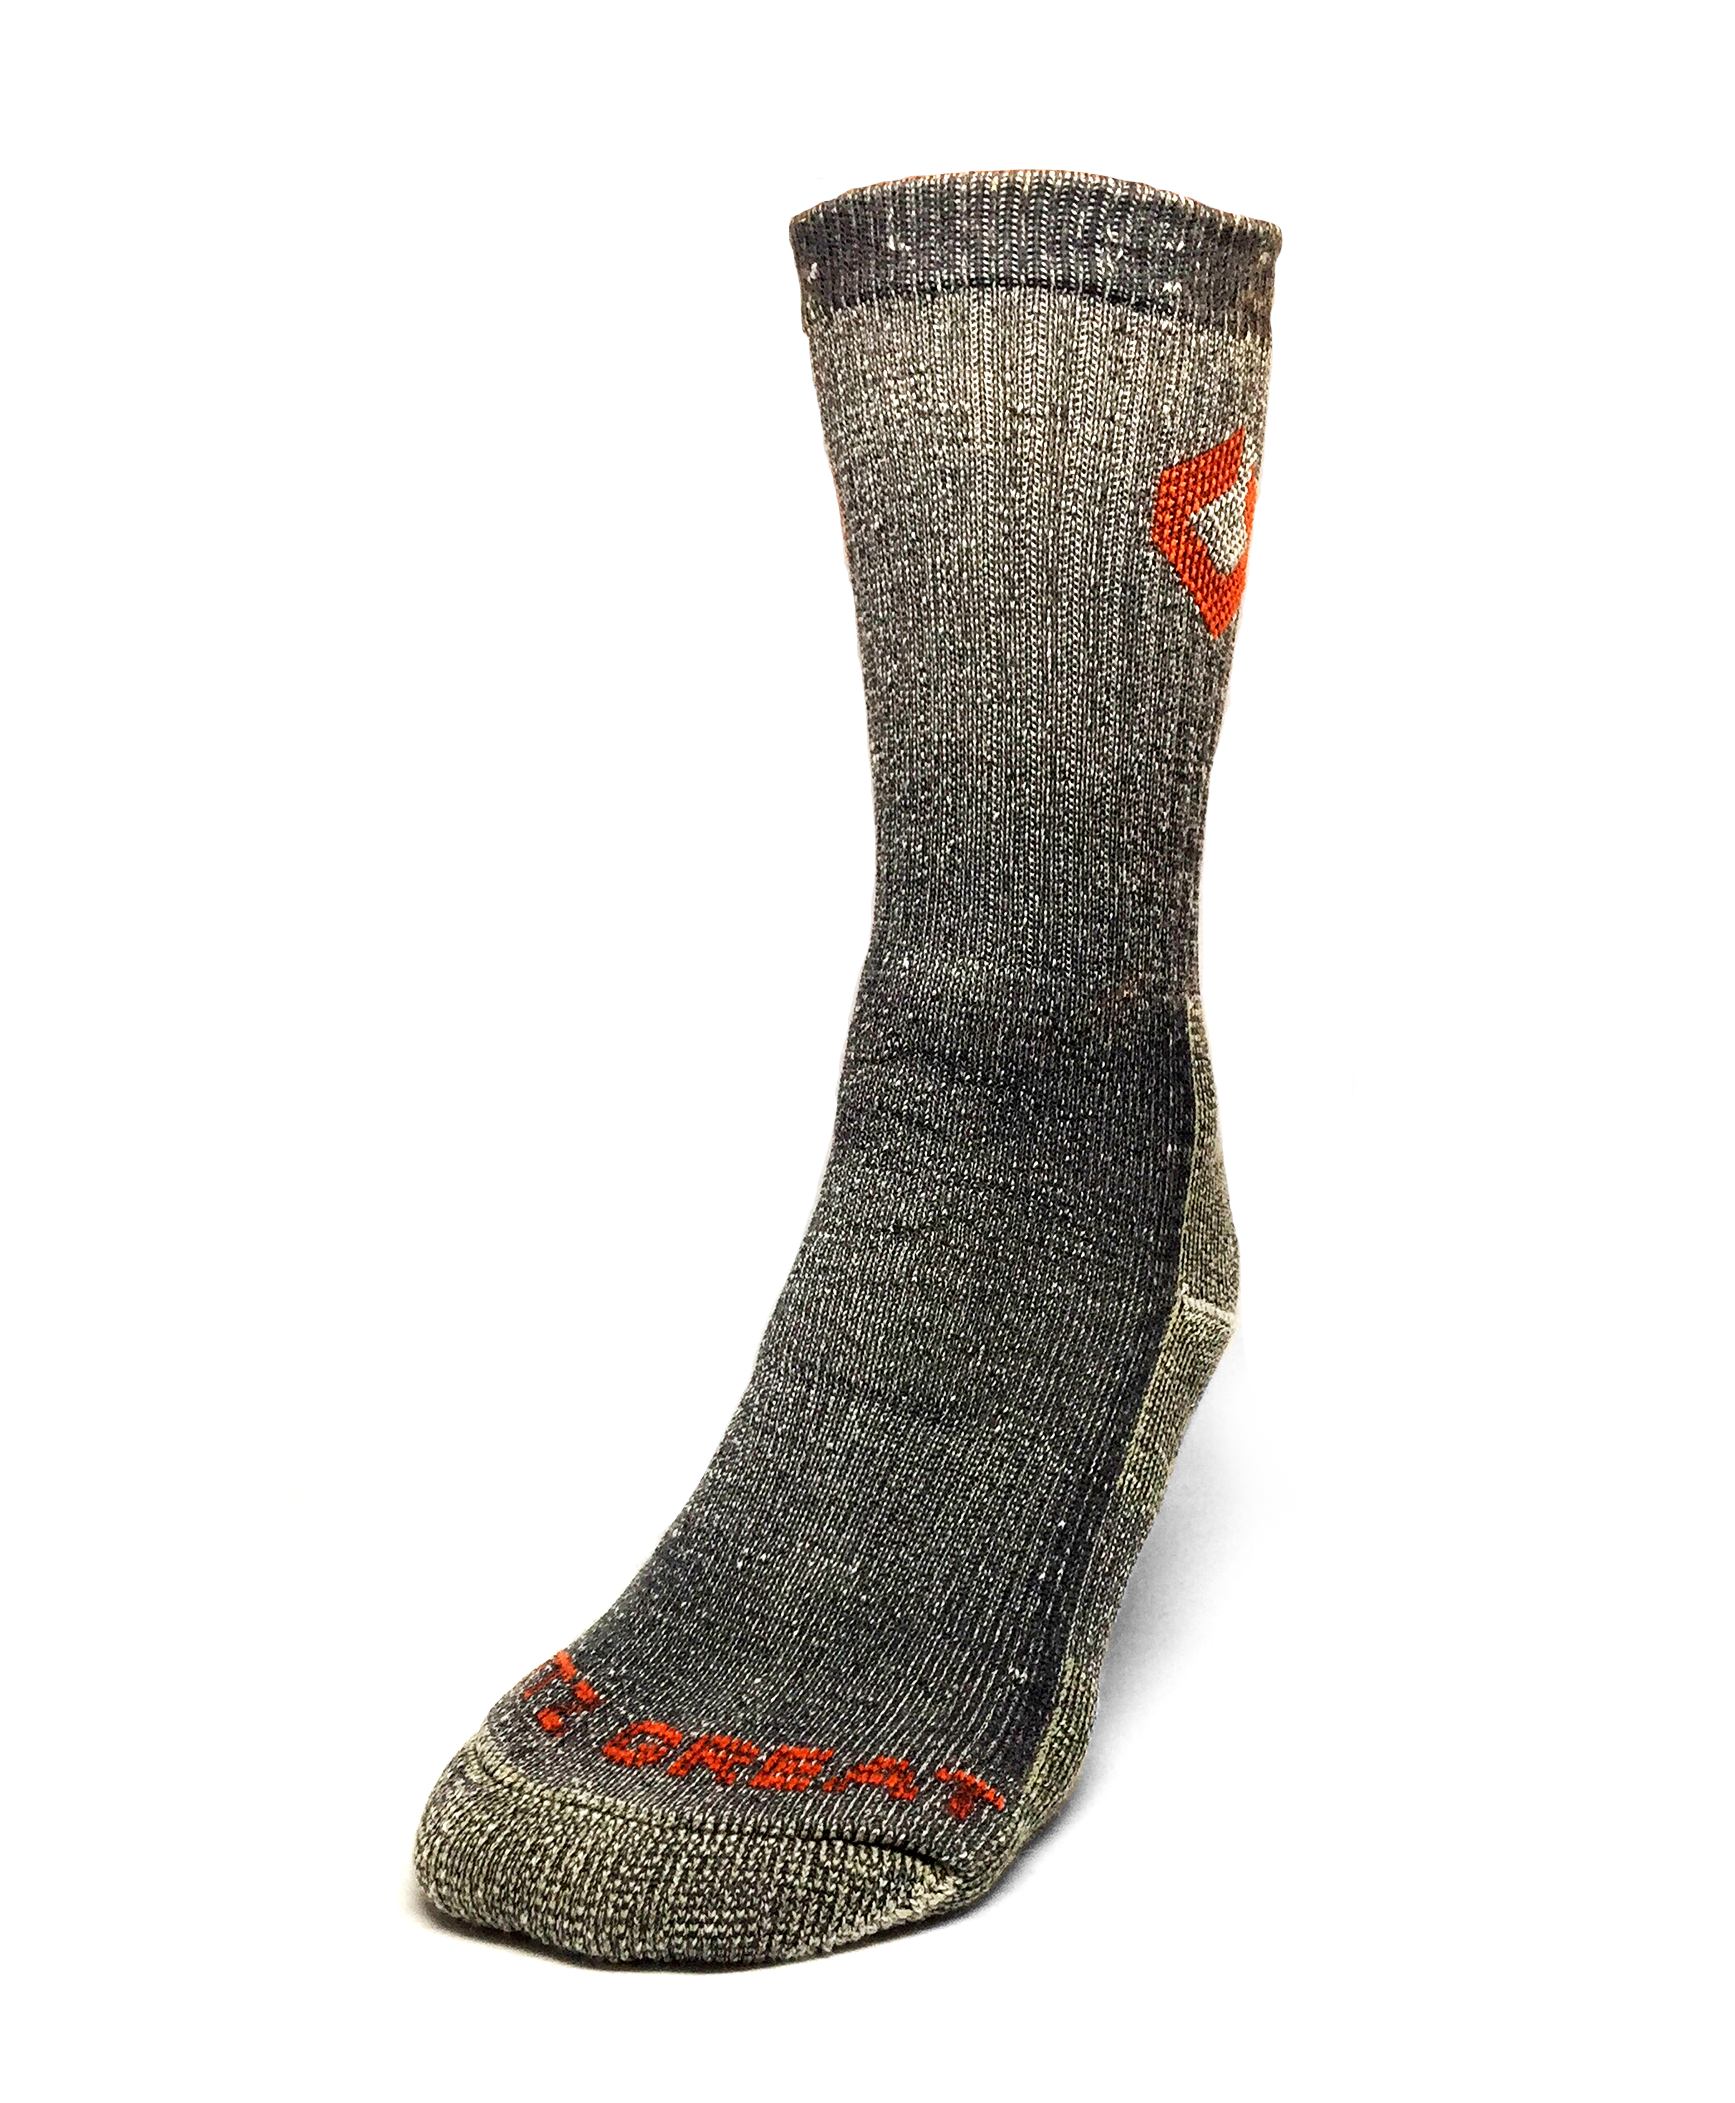 High-Tech Socks with Copptech yarn size 9-10 (1 pair)